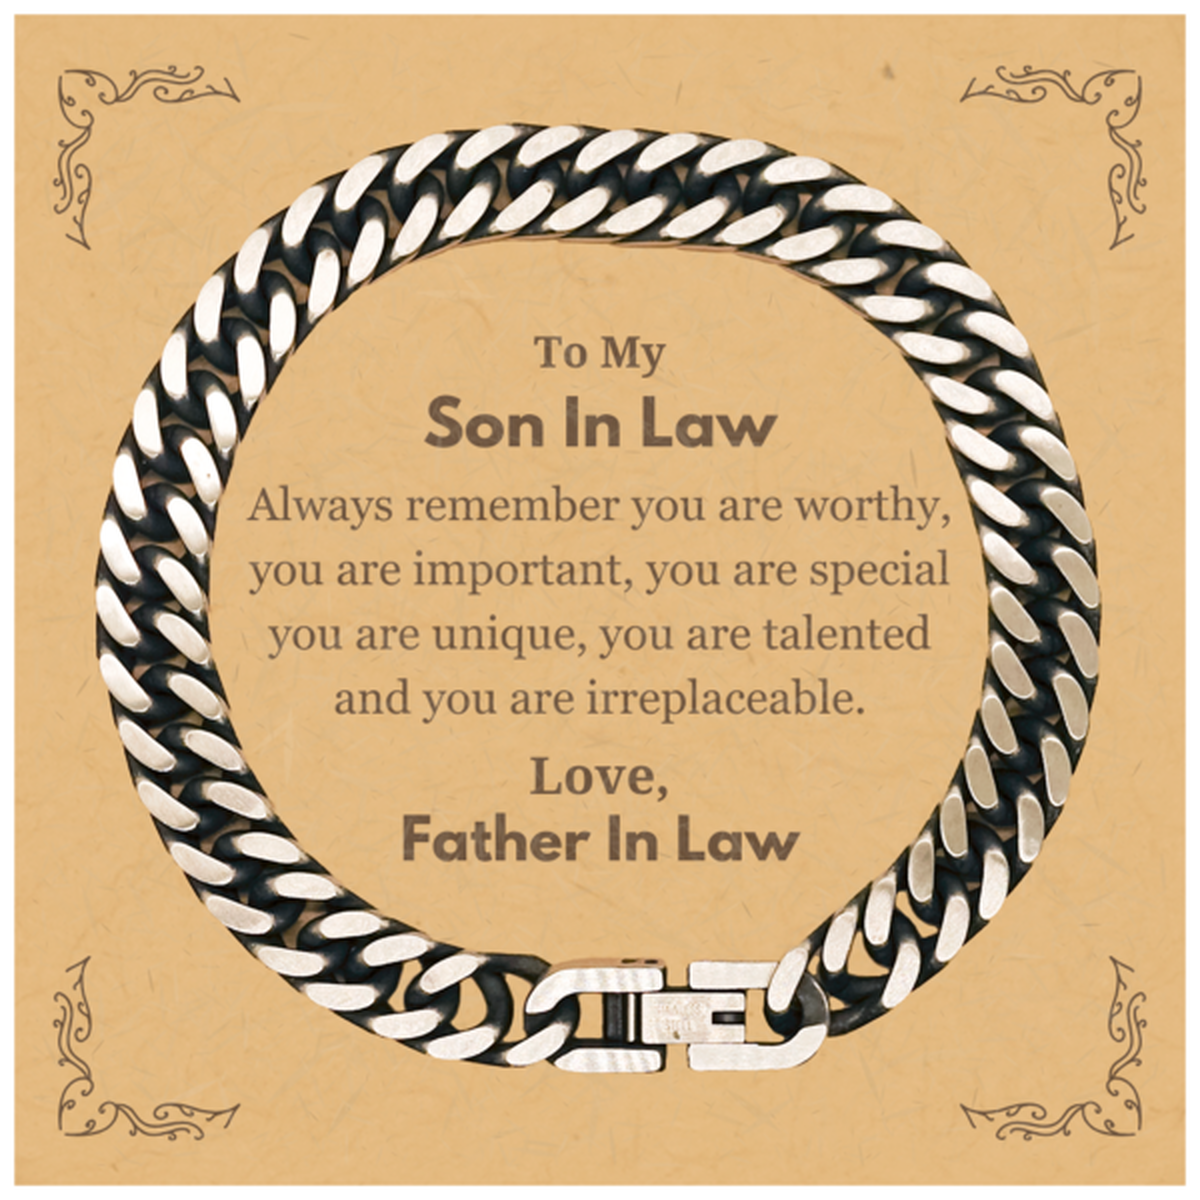 Son In Law Birthday Gifts from Father In Law, Inspirational Cuban Link Chain Bracelet for Son In Law Christmas Graduation Gifts for Son In Law Always remember you are worthy, you are important. Love, Father In Law